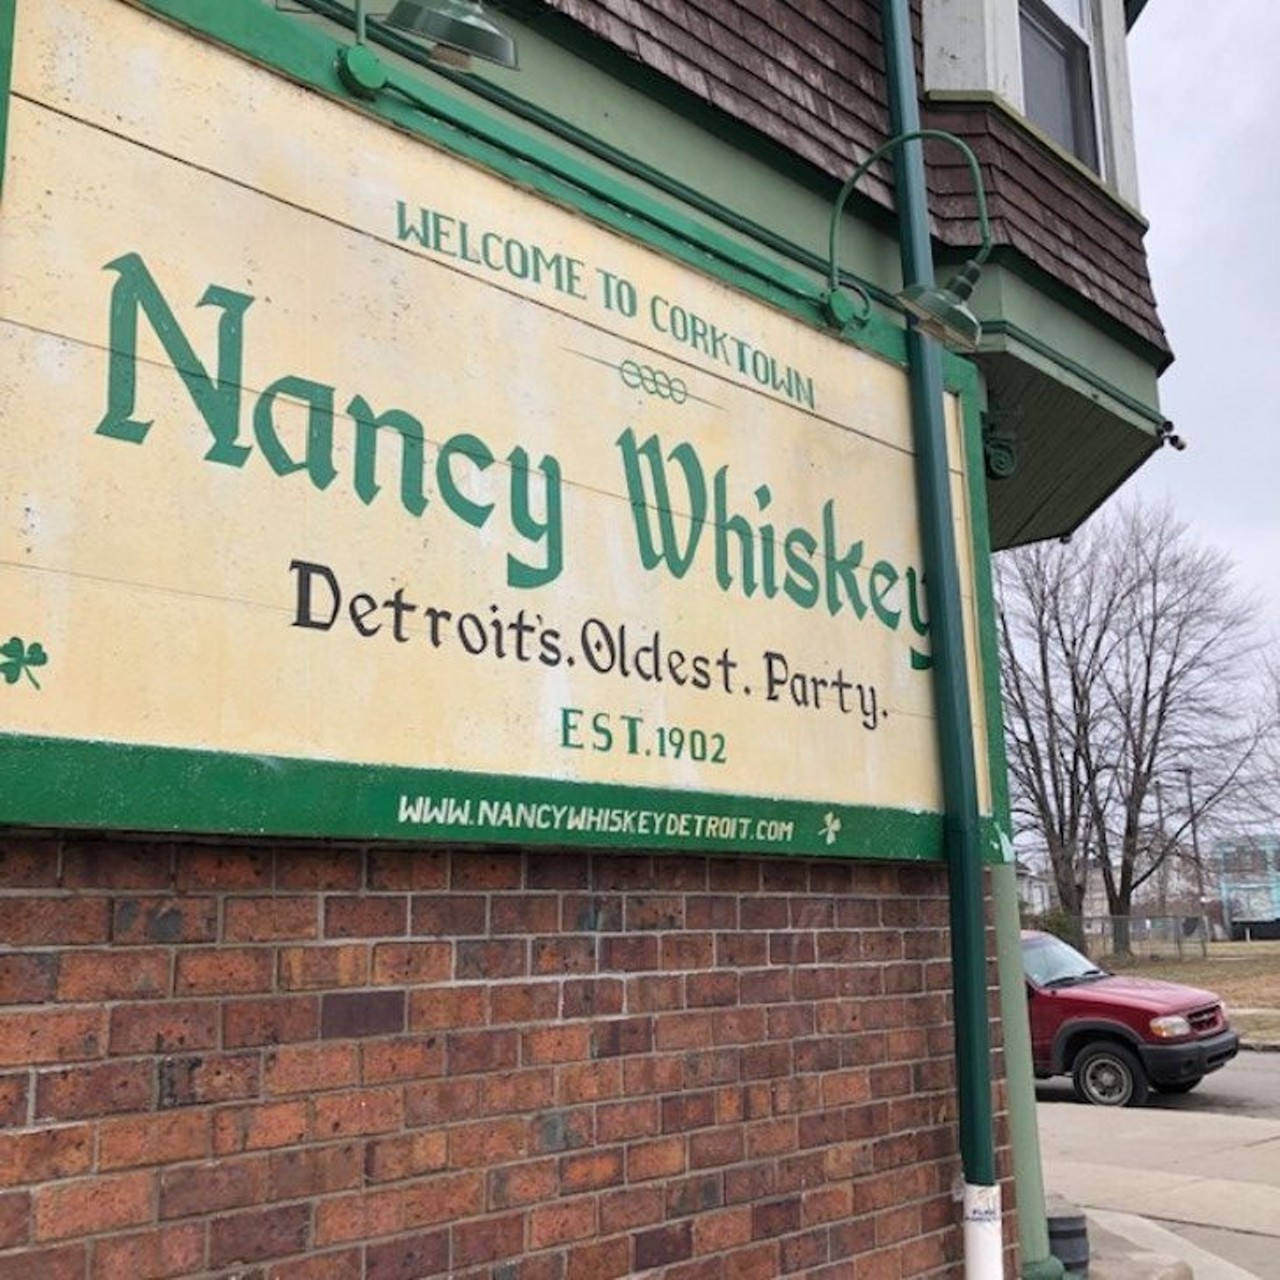 Nancy Whiskey
2644 Harrison St., Detroit; 313-962-4247
Originally opened in 1902, Corktown&#146;s Nancy Whiskey offers weekly drink specials, free jukebox on &#147;Whiskey Wednesdays,&#148; and live music on Friday and Saturday nights.
Photo by Devin Culham